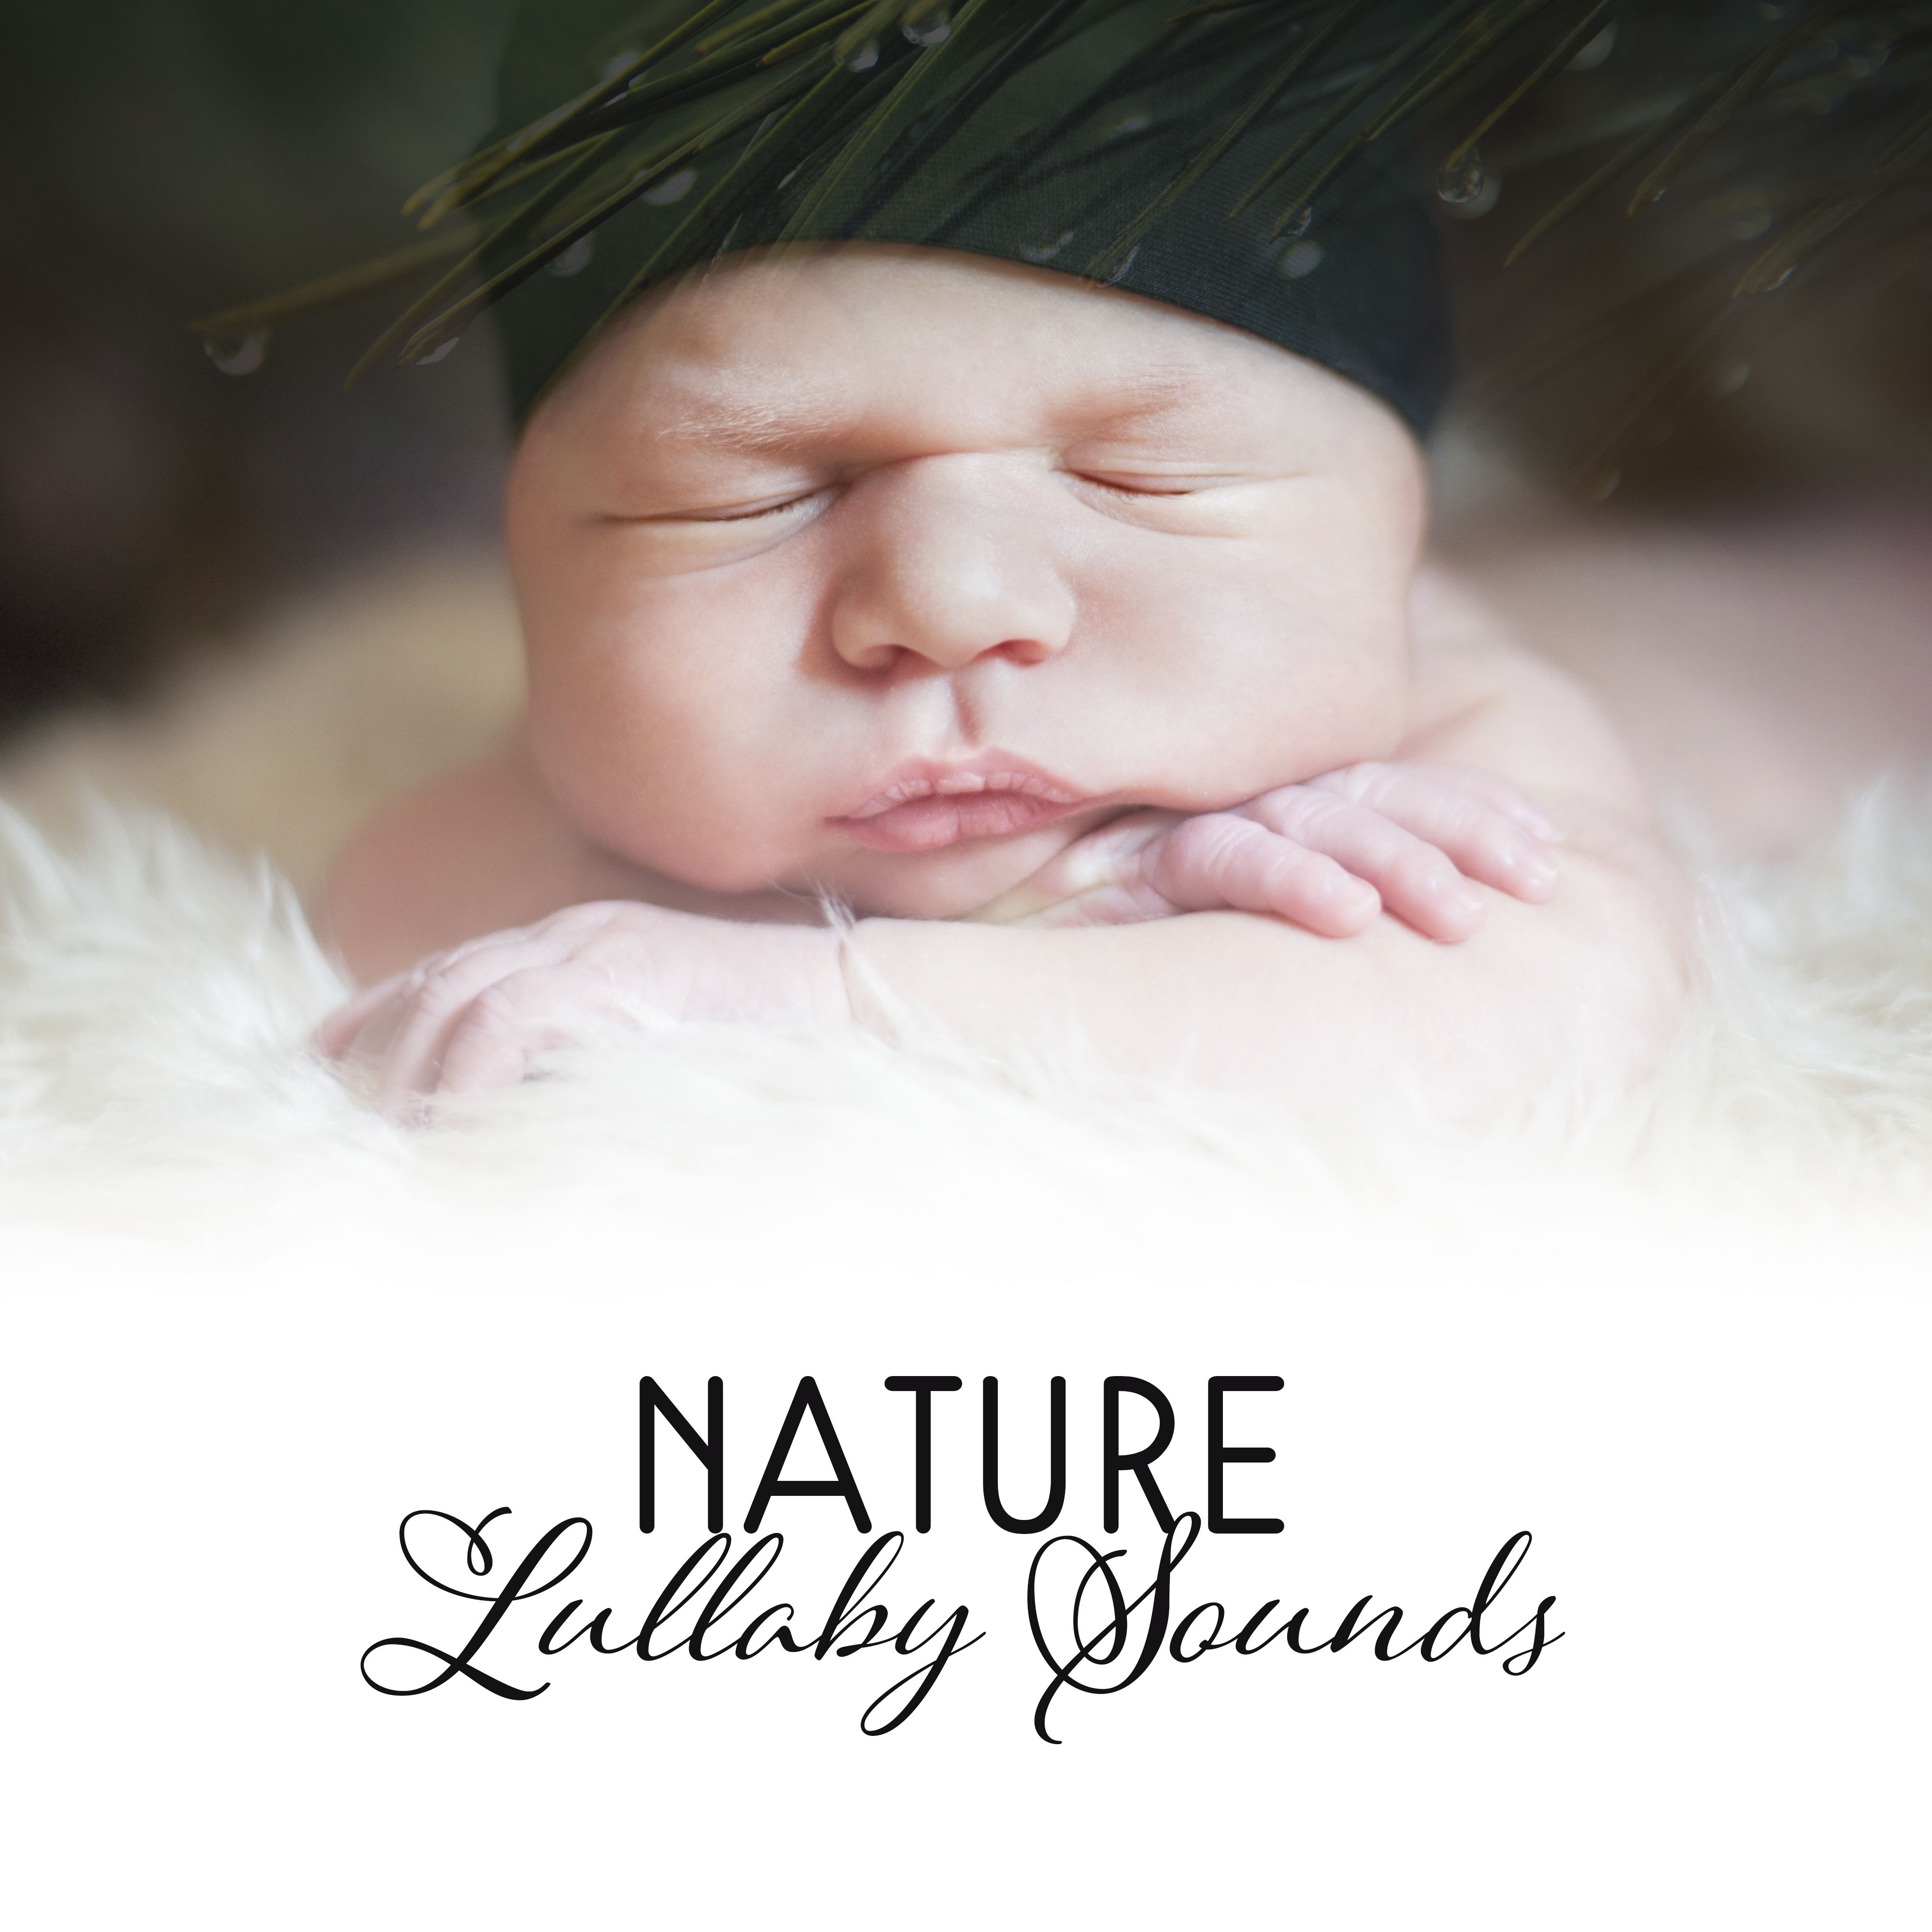 Nature Lullaby Sounds